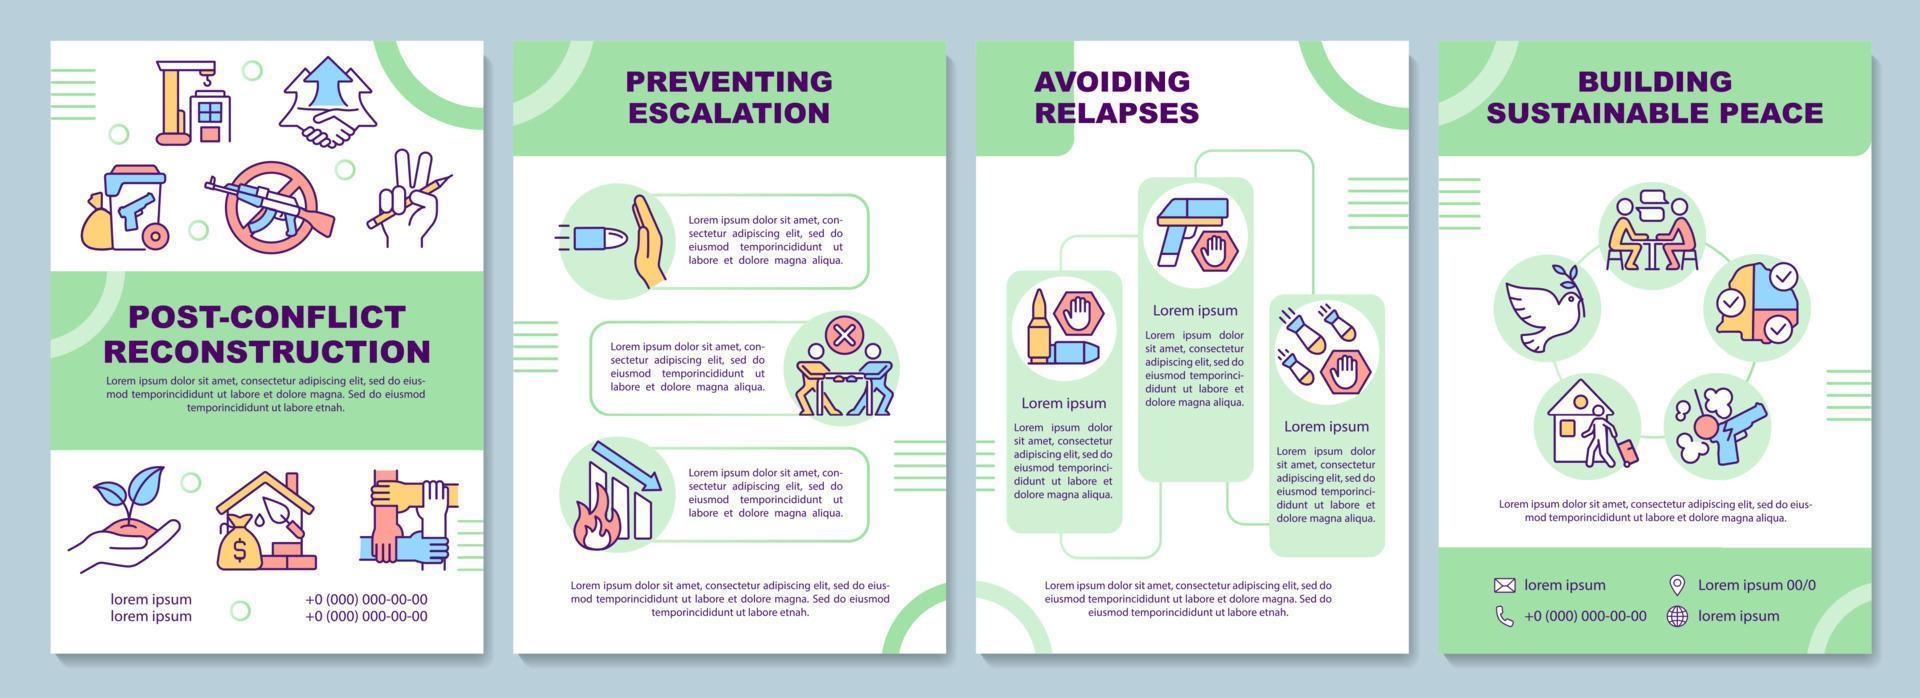 Post conflict reconstruction green brochure template. Avoiding relapses. Leaflet design with linear icons. 4 vector layouts for presentation, annual reports.